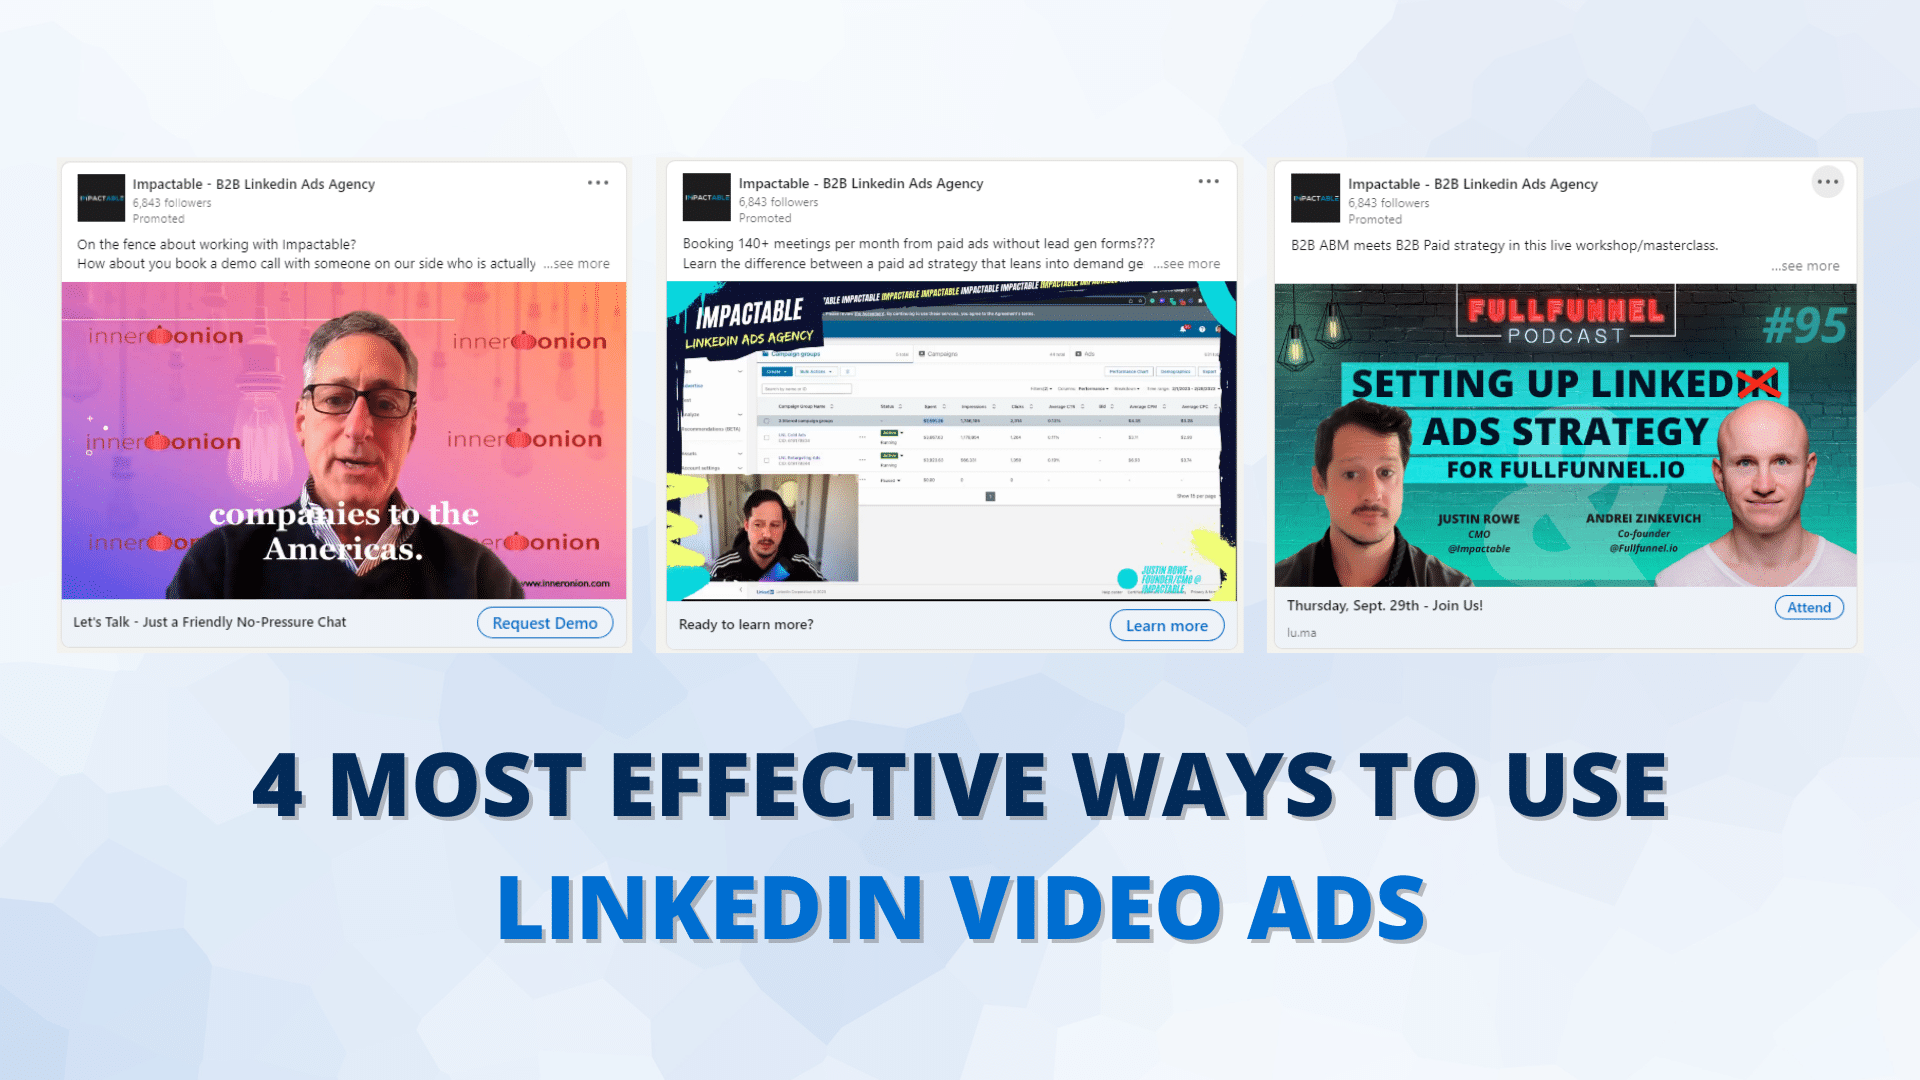 4 Most Effective Ways to Use LinkedIn Video Ads